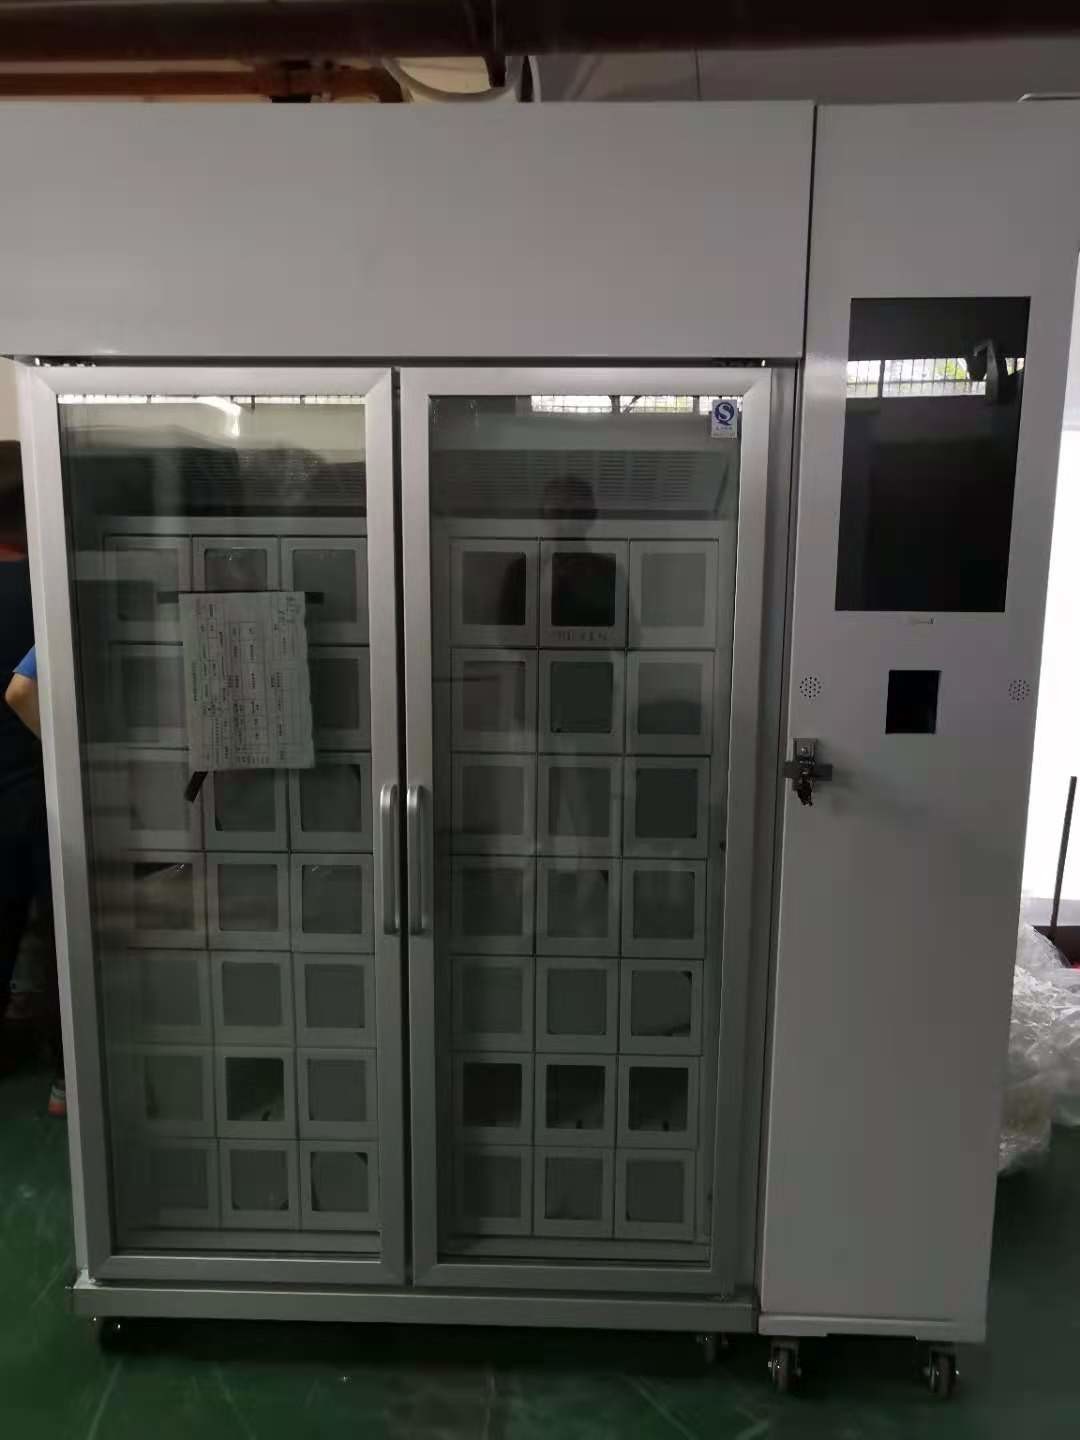 Quality 22 Inch Frozen Vending Machine For Meat Cheese Ice Cream Locker Size Customized for sale